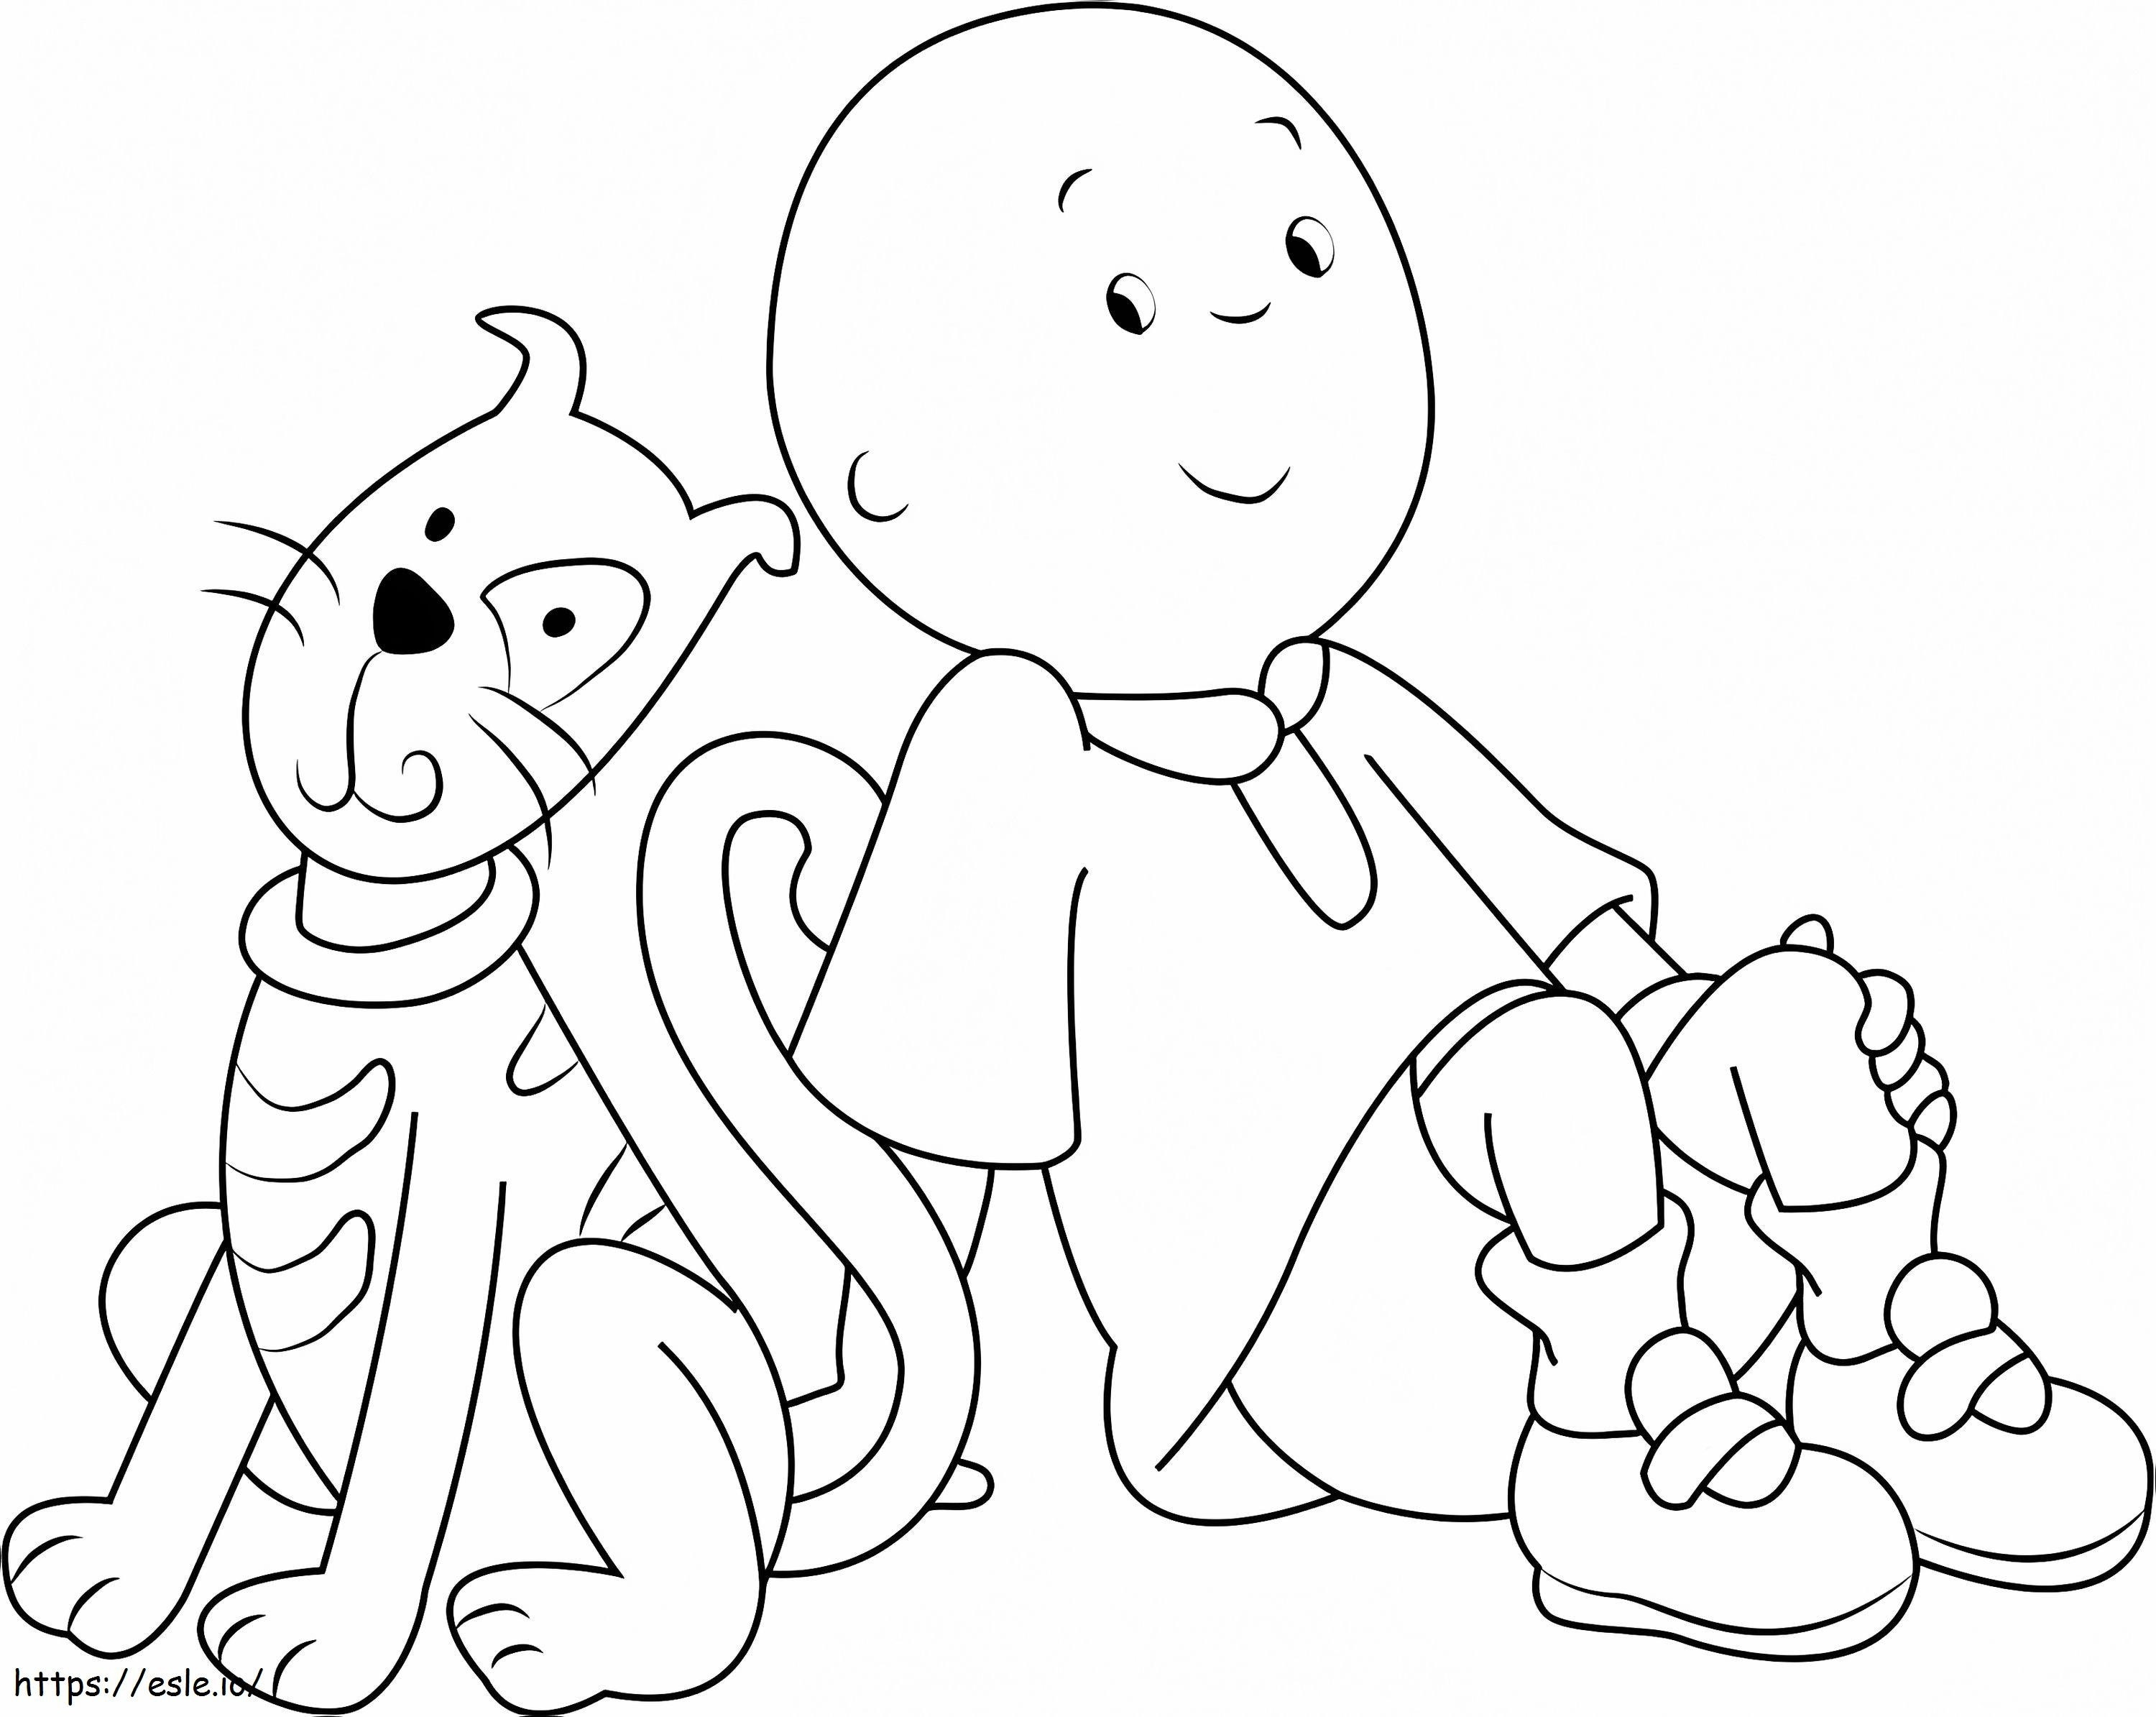 Caillou Sitting With Cata4 coloring page